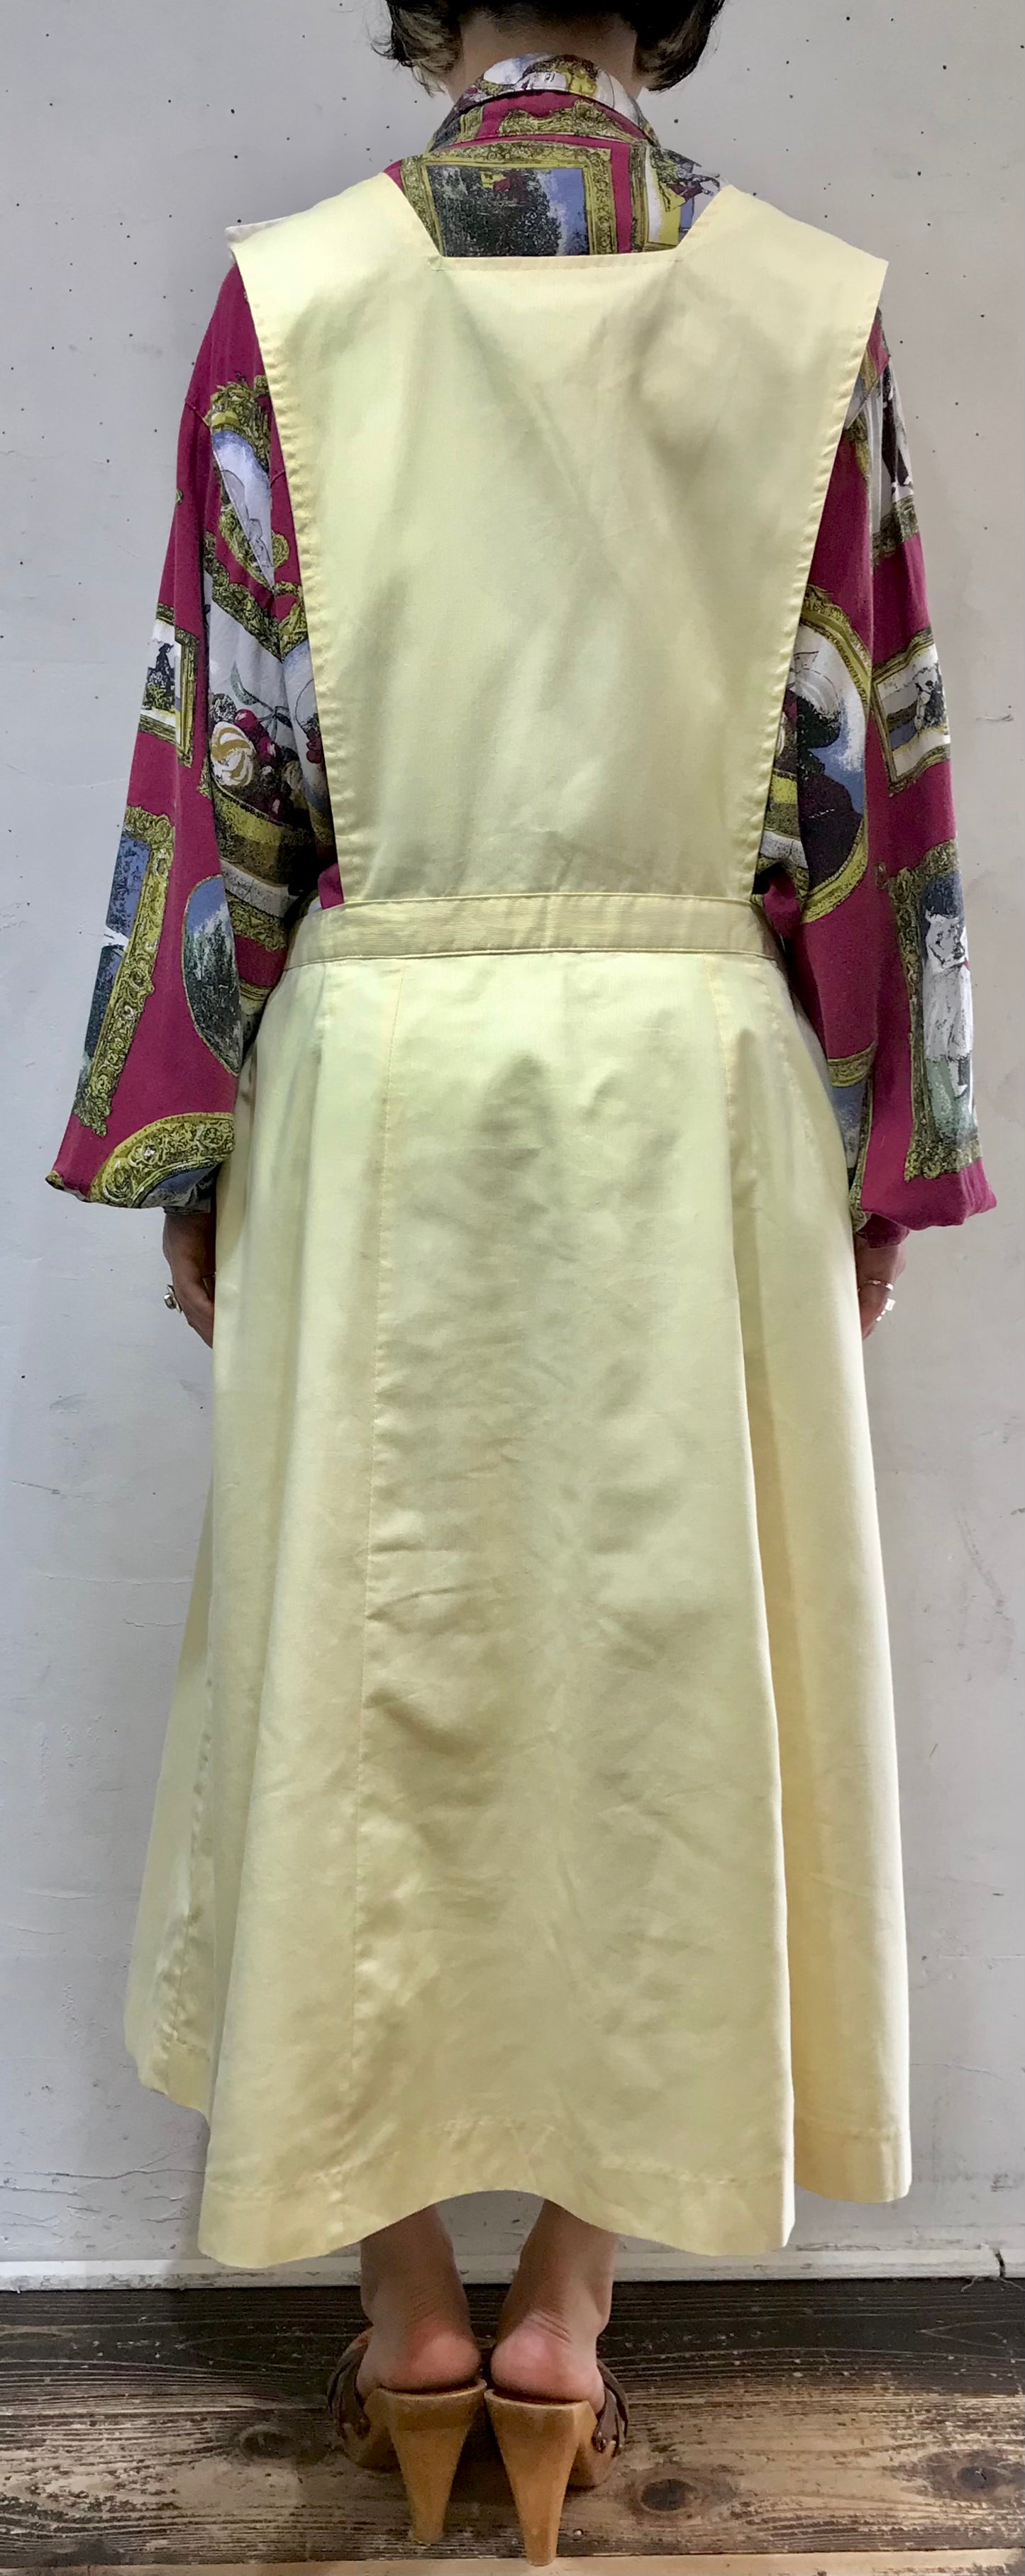 Vintage Over Dress MADE IN USA [B19459]